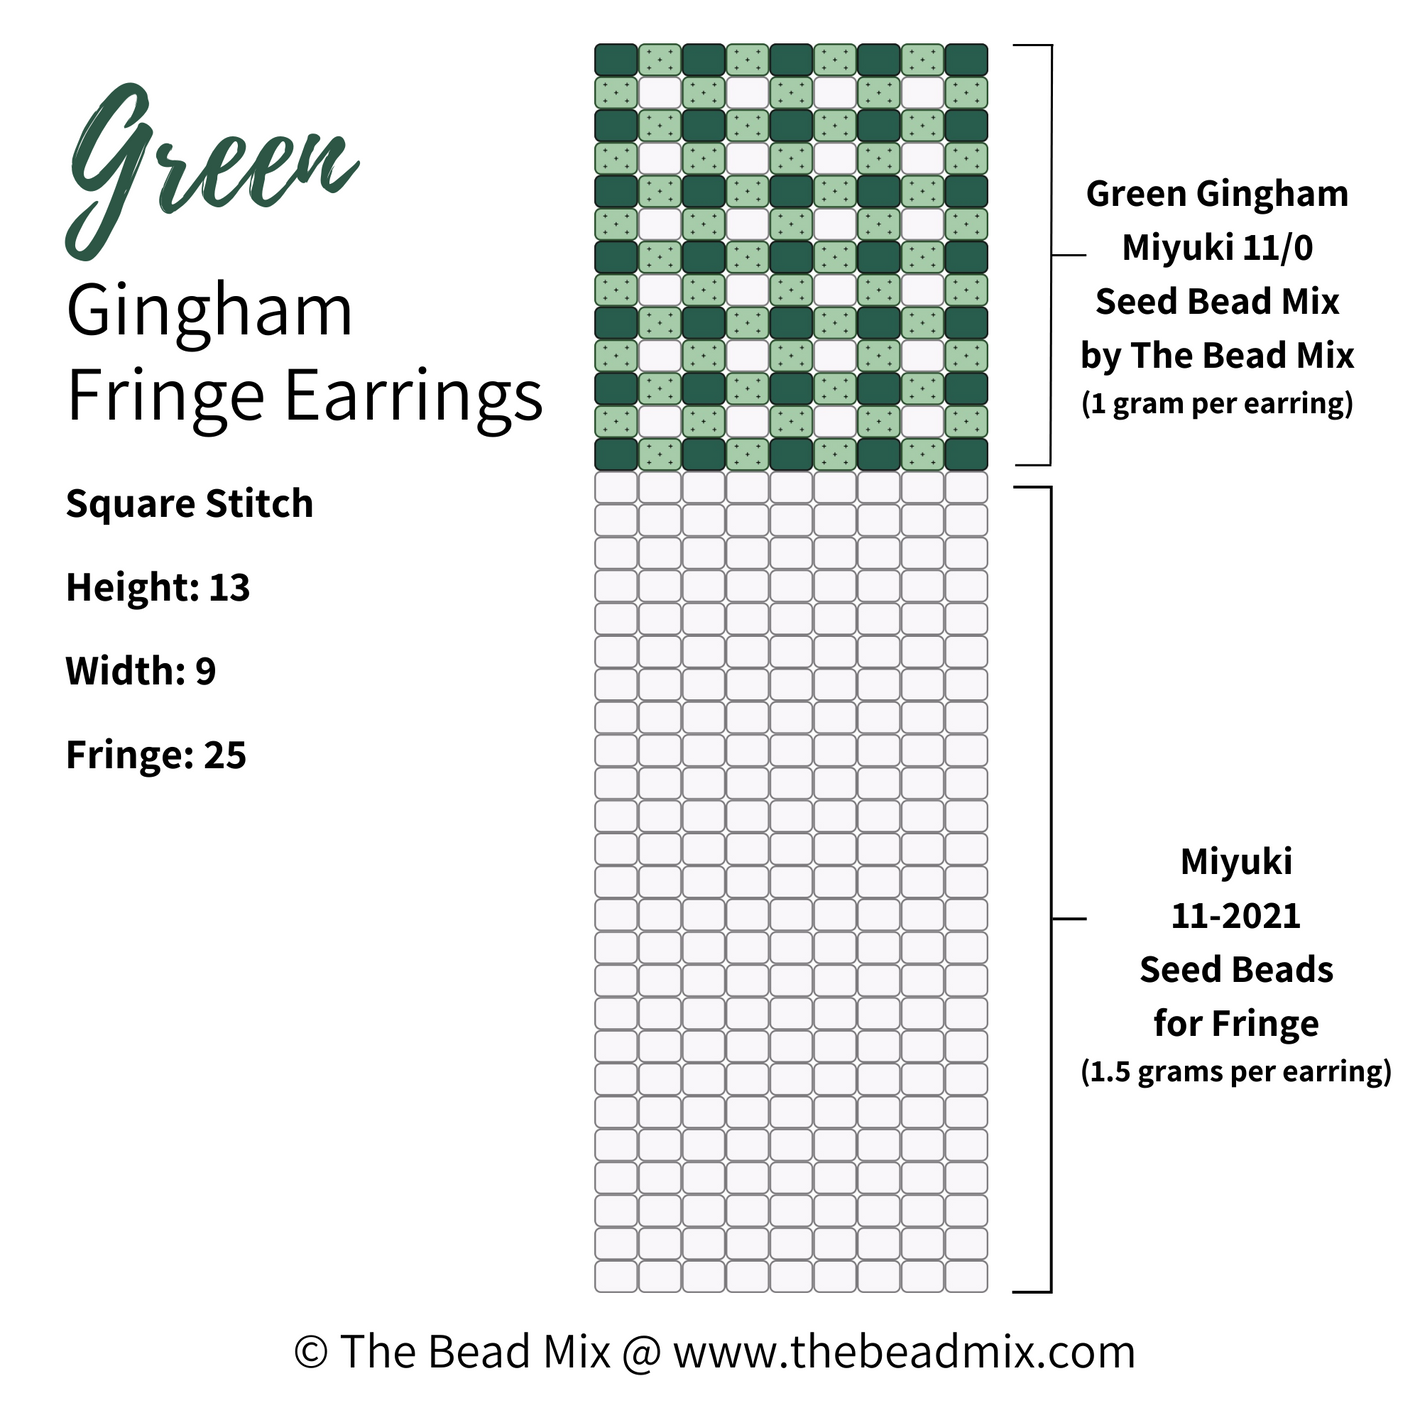 Free square stitch beading pattern to make green gingham pattern fringe earrings by The Bead Mix